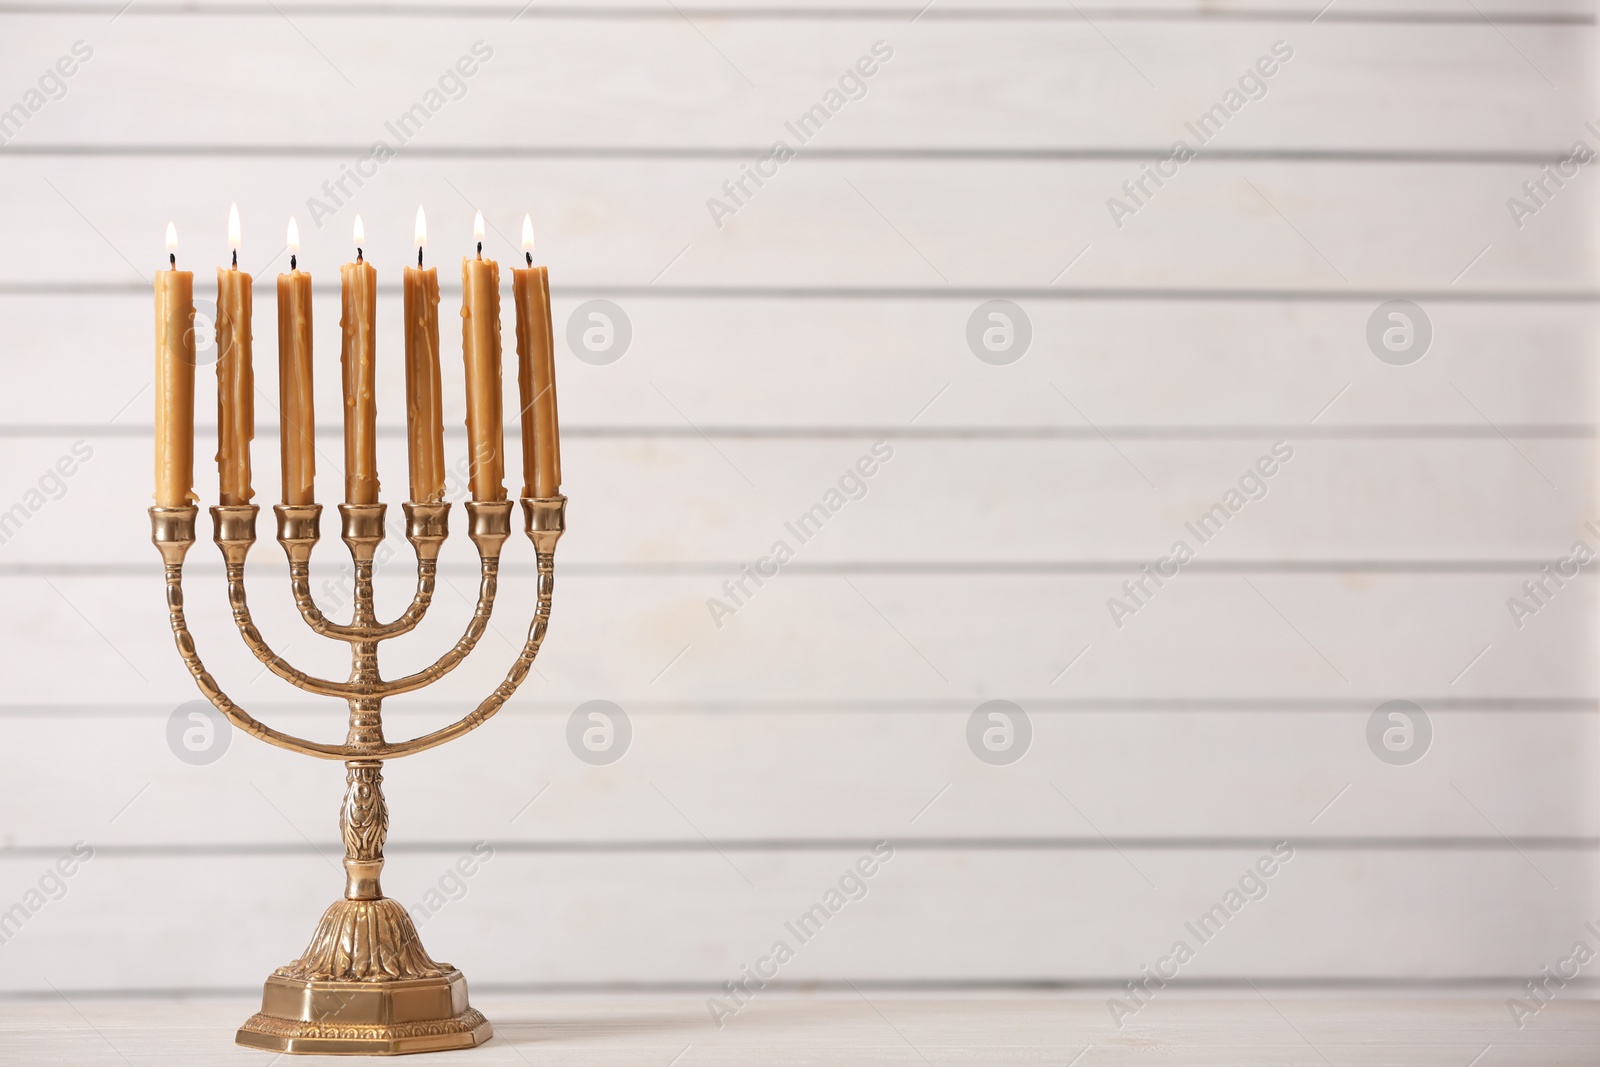 Photo of Golden menorah with burning candles on table against light background, space for text